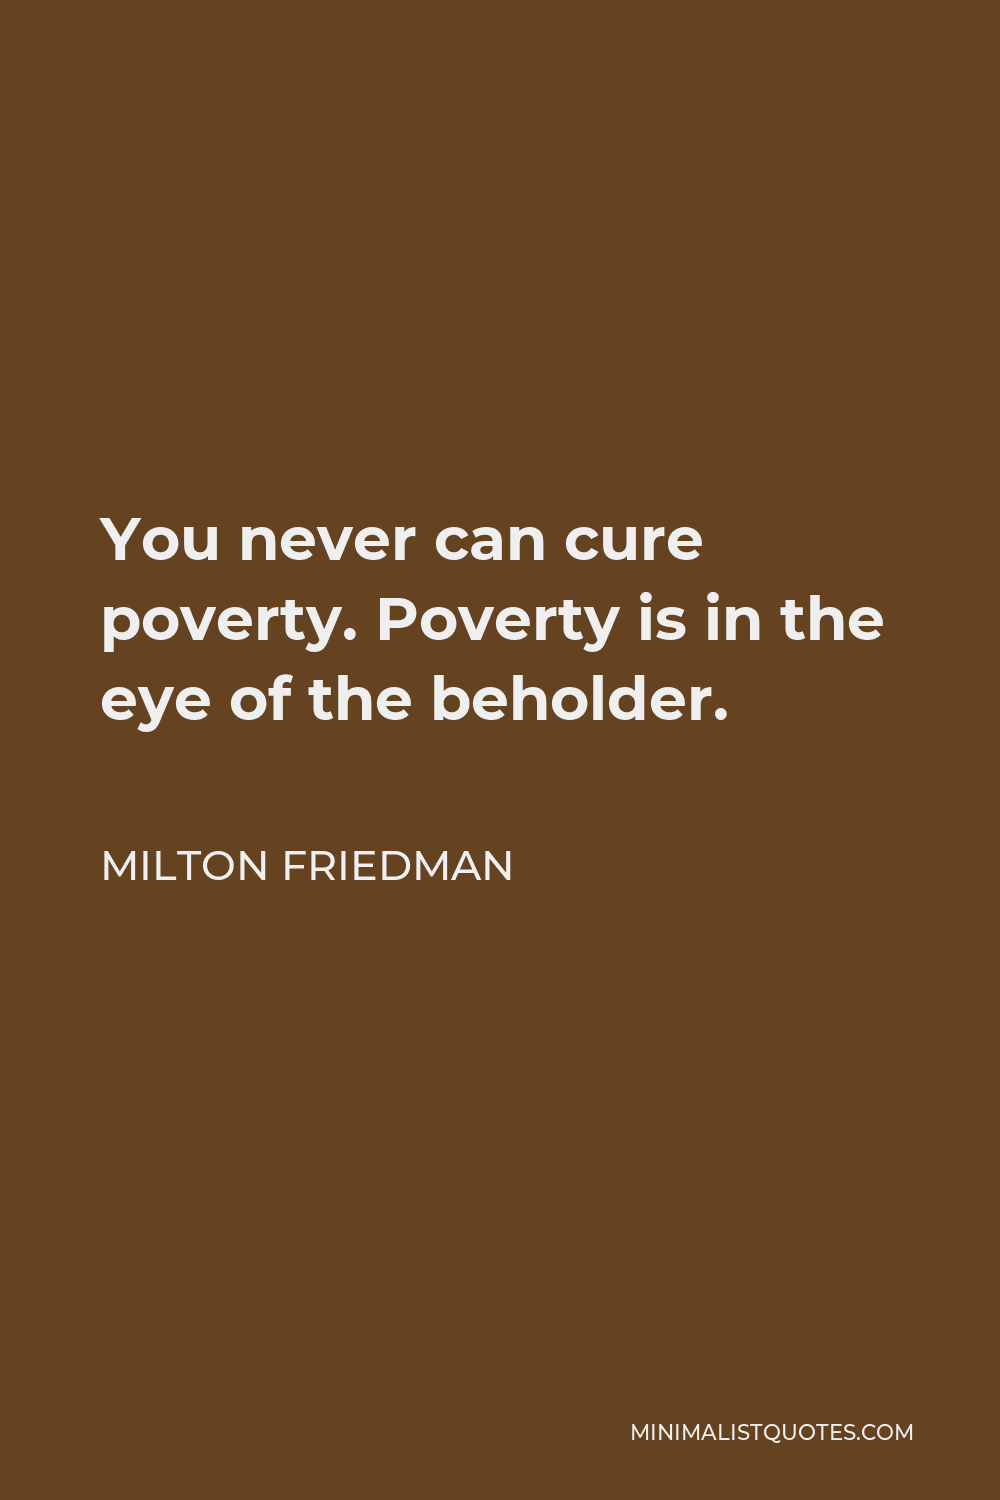 Milton Friedman Quote - You never can cure poverty. Poverty is in the eye of the beholder.